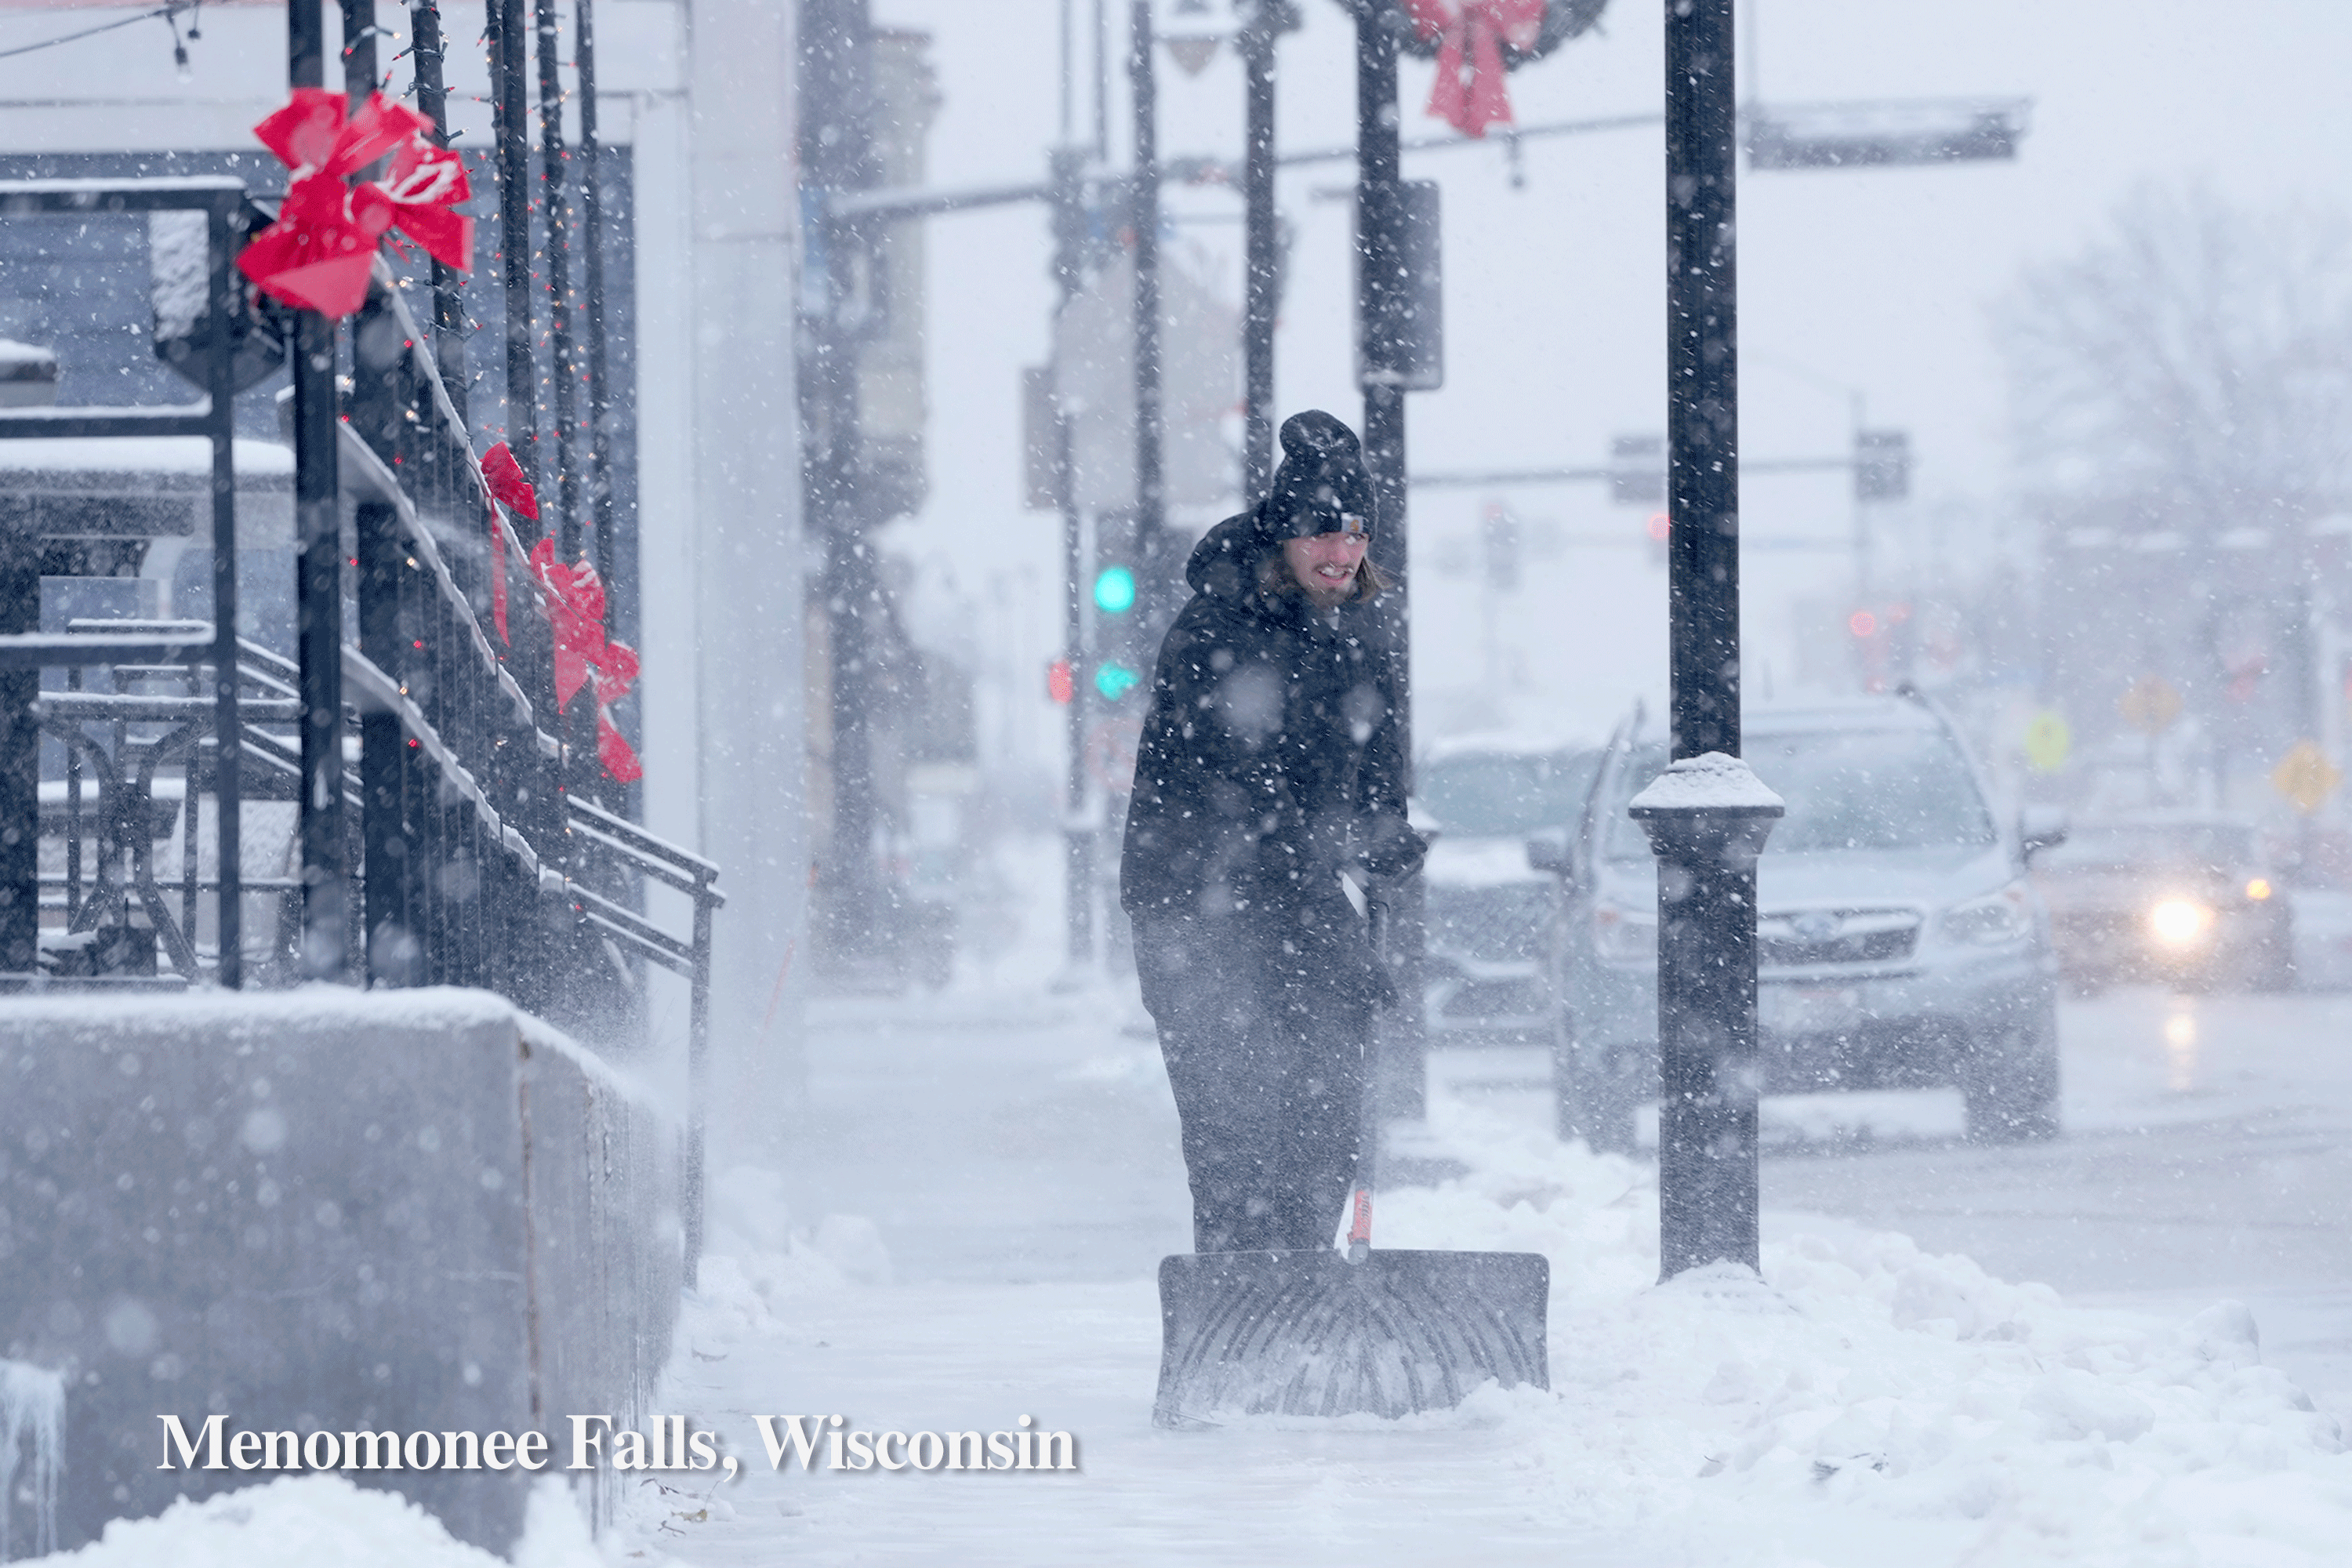 A person shovels snow in Menomonee Falls, Wisconsin, as opposed to a person along the shoreline in Long Beach.